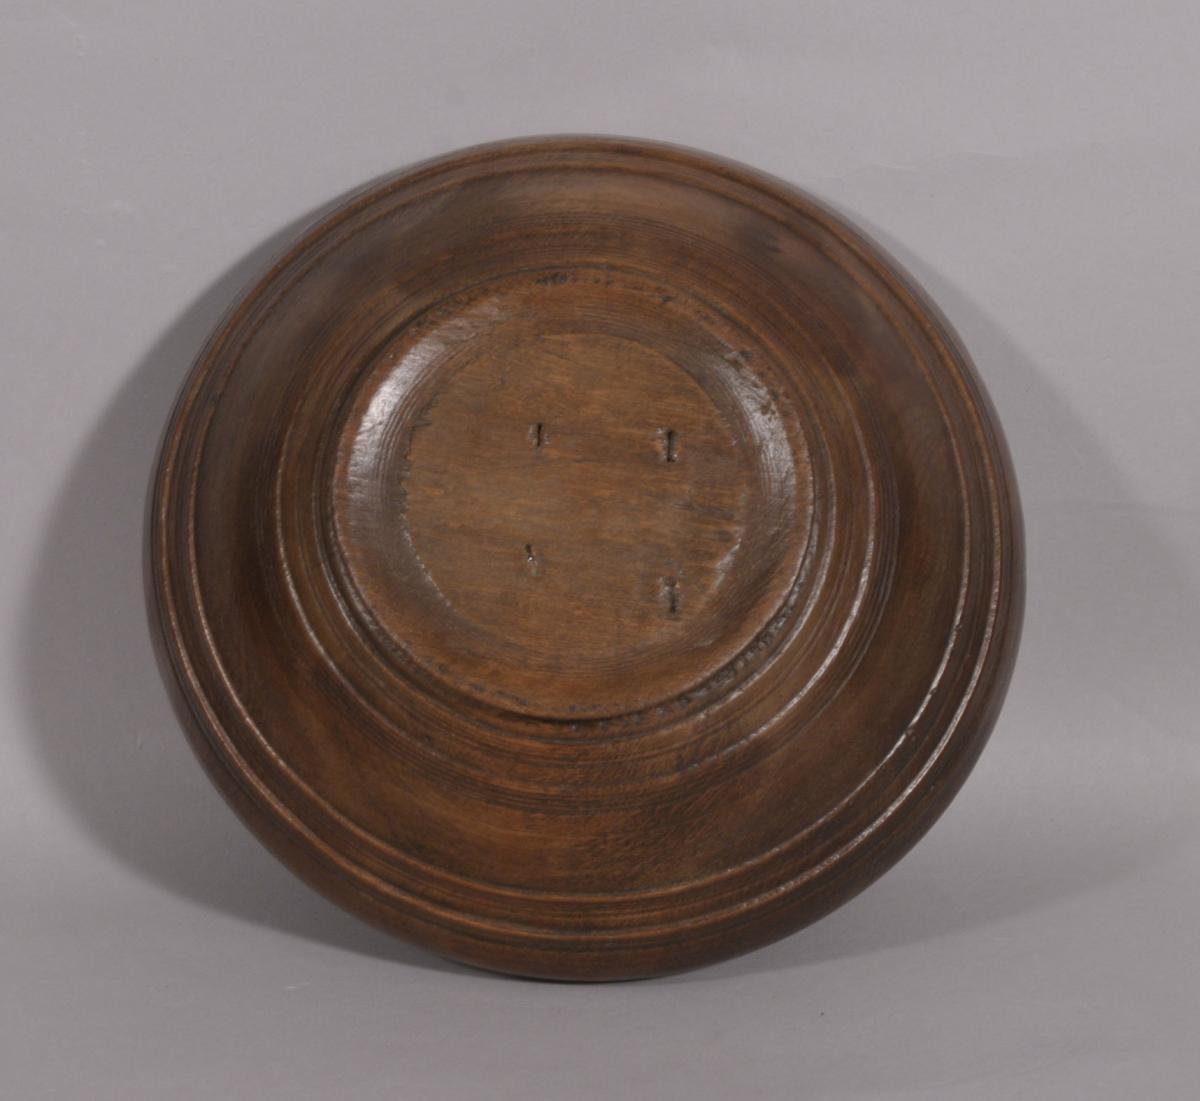 S/4454 Antique Treen Fruitwood Serving Bowl of the Georgian Period